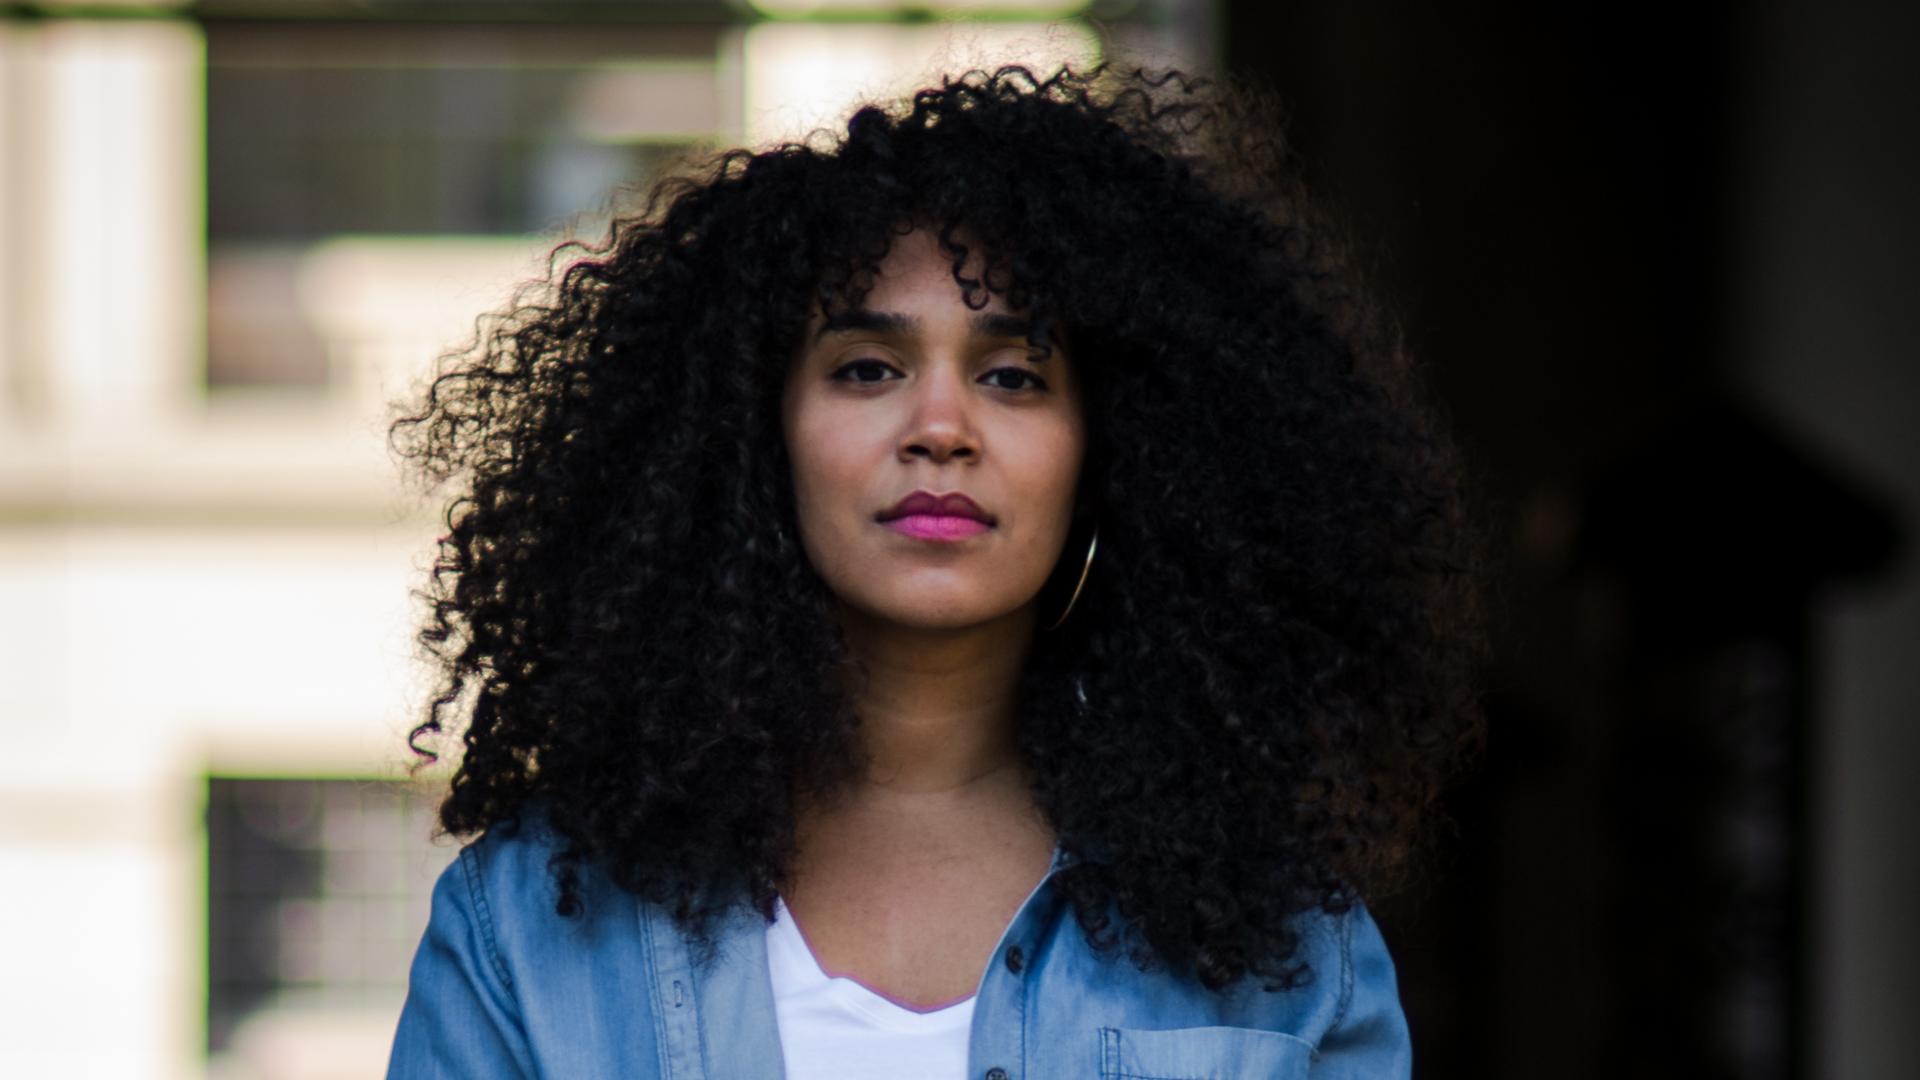 POET ELIZABETH ACEVEDO: EXERCISE WHEN YOU'RE INSECURE - Not Plant Based